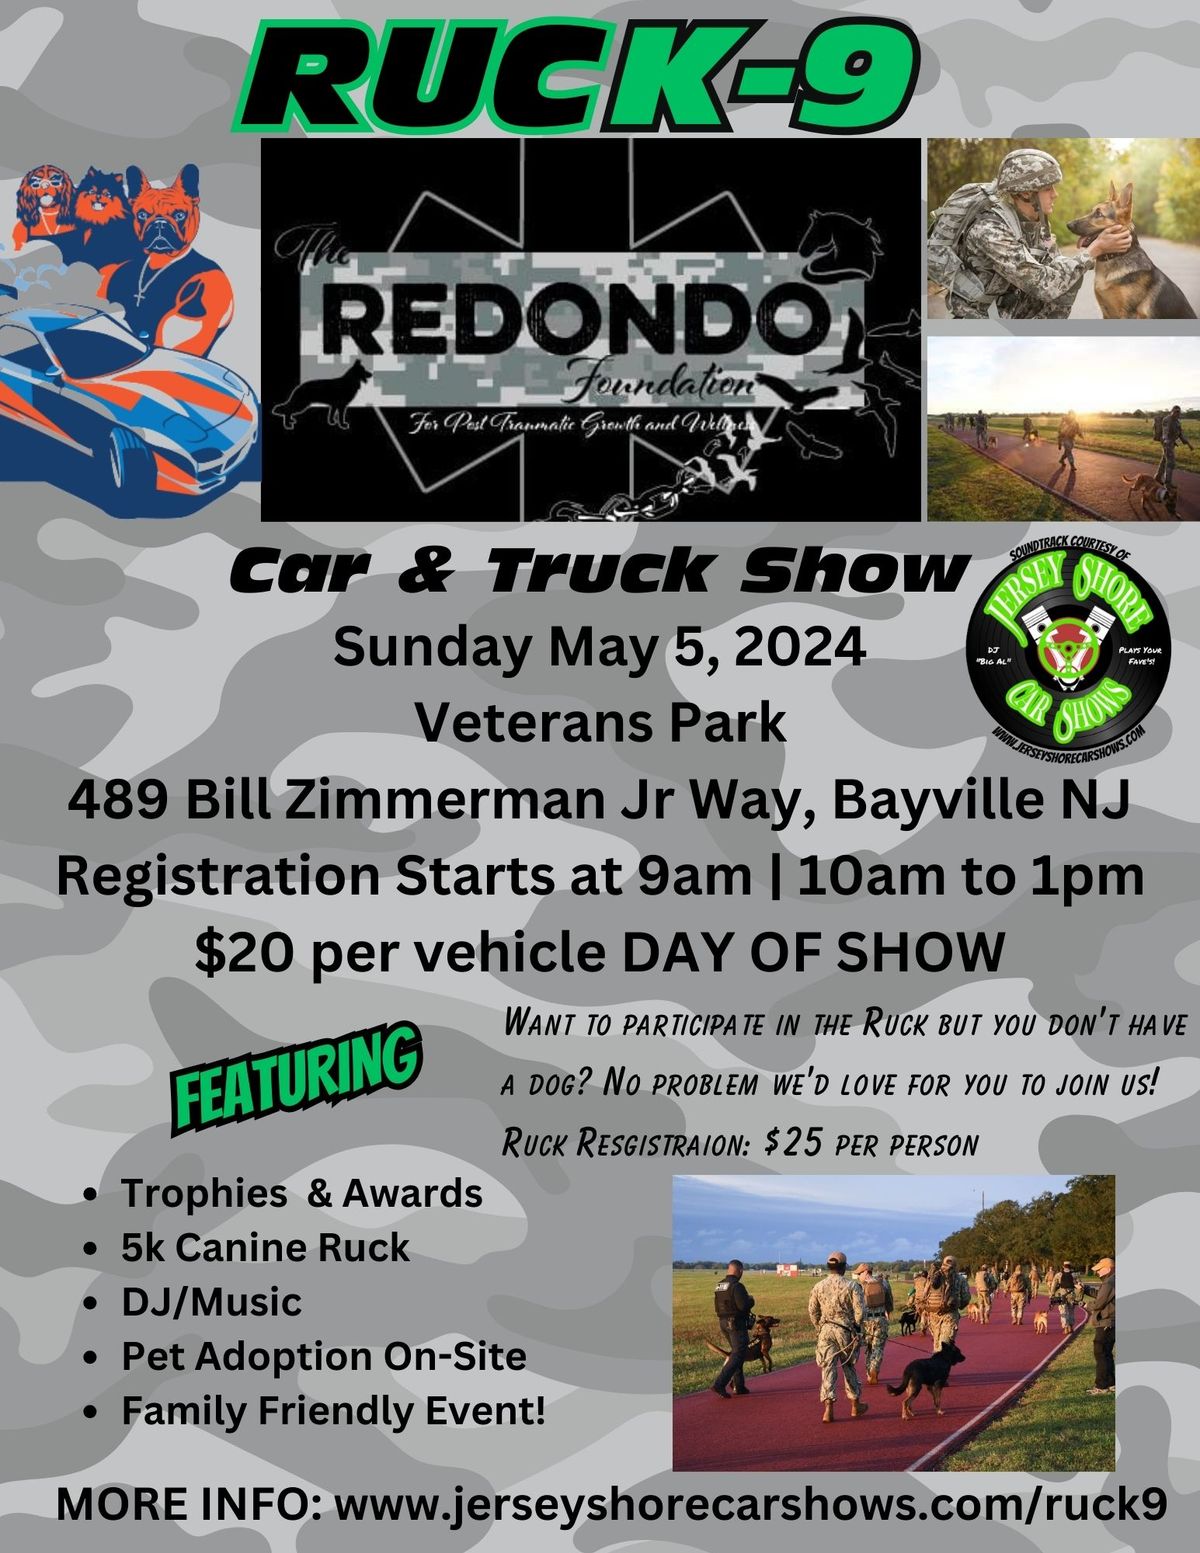 RUCK-9 Car and Truck Show